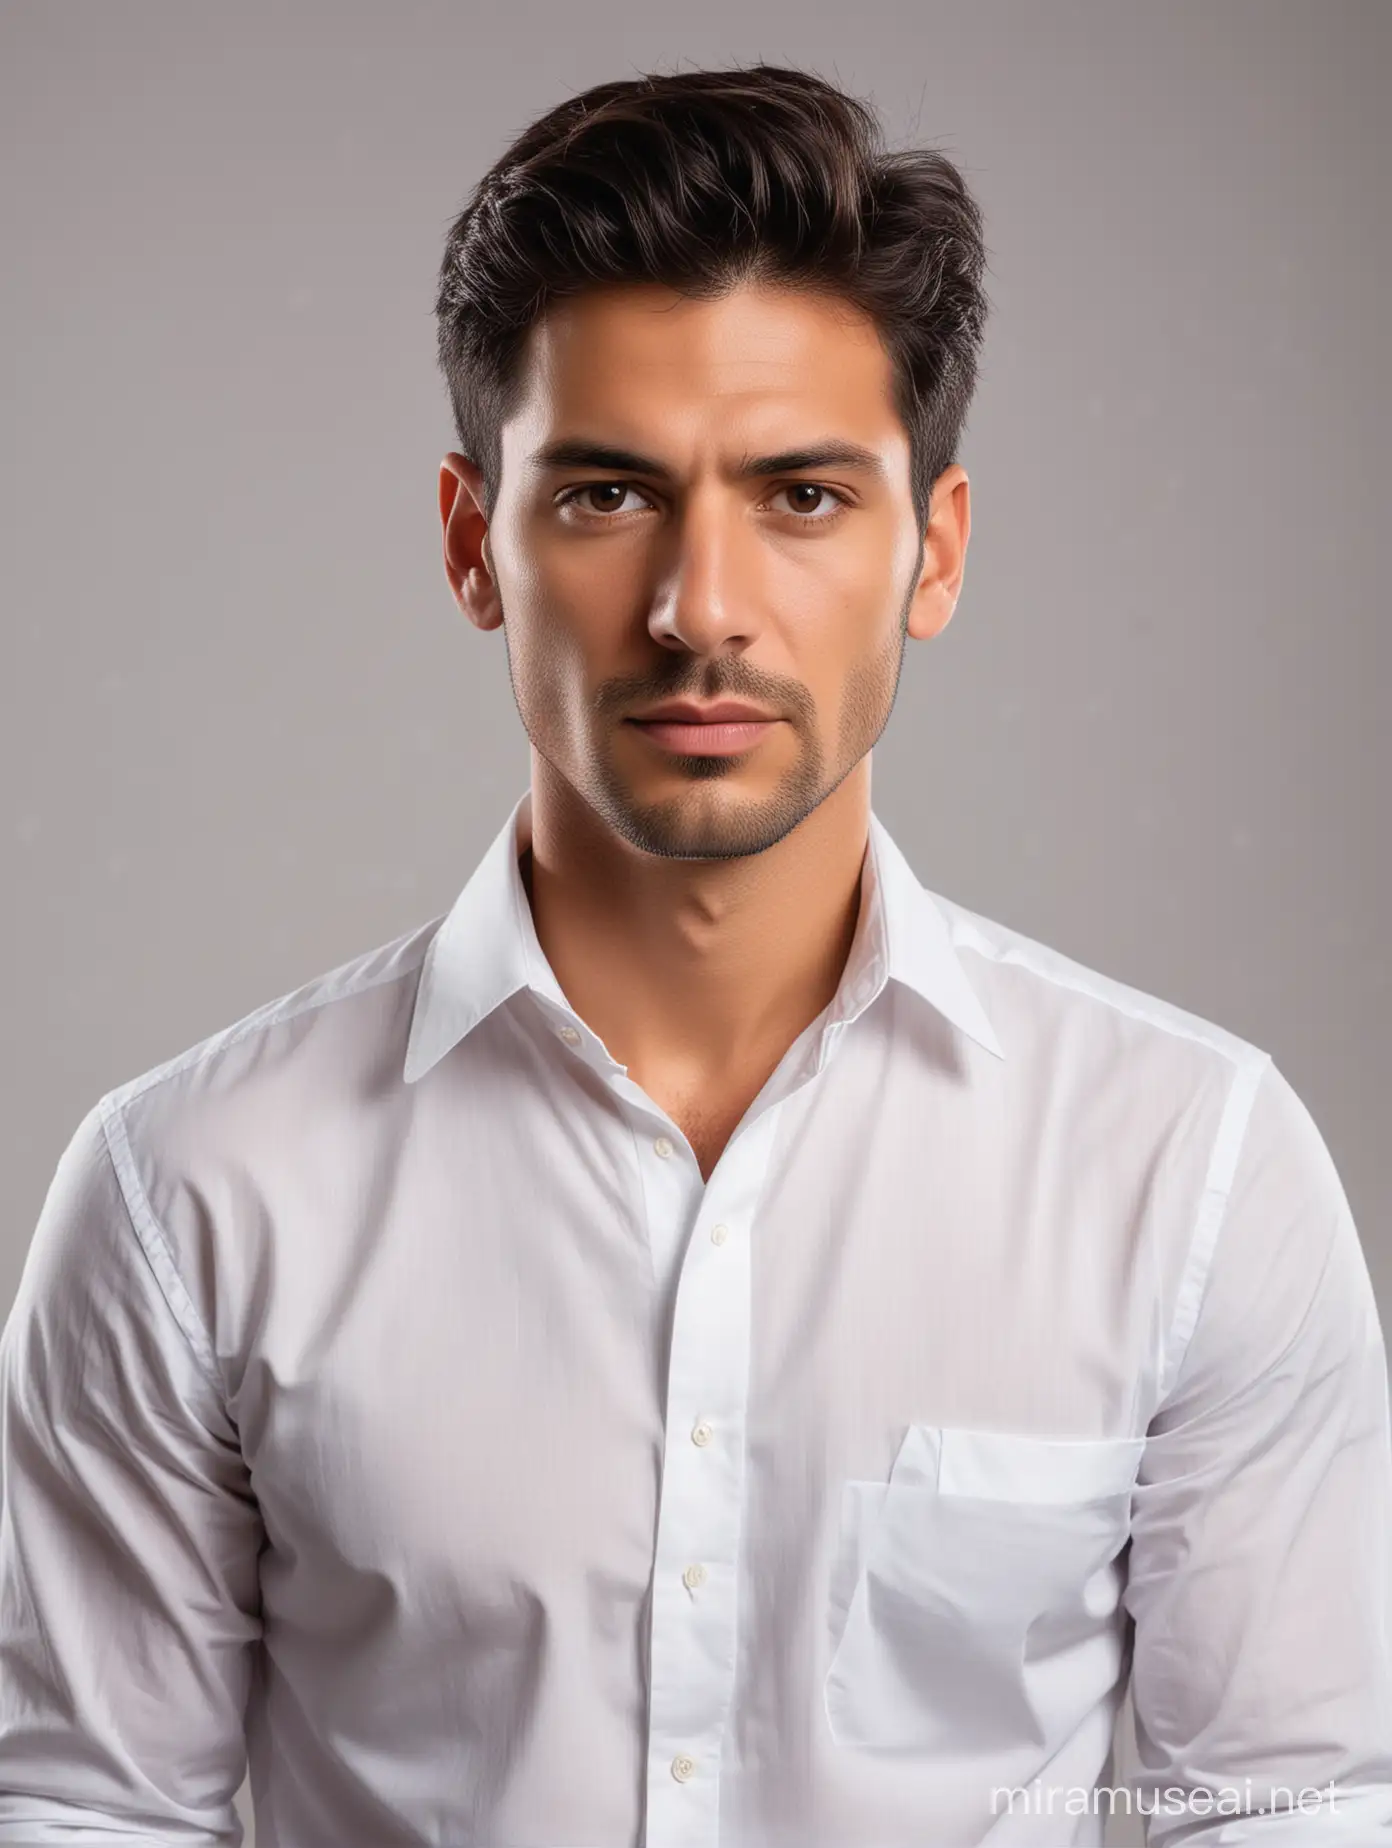 Latin American Man in White Shirt with Serious Expression